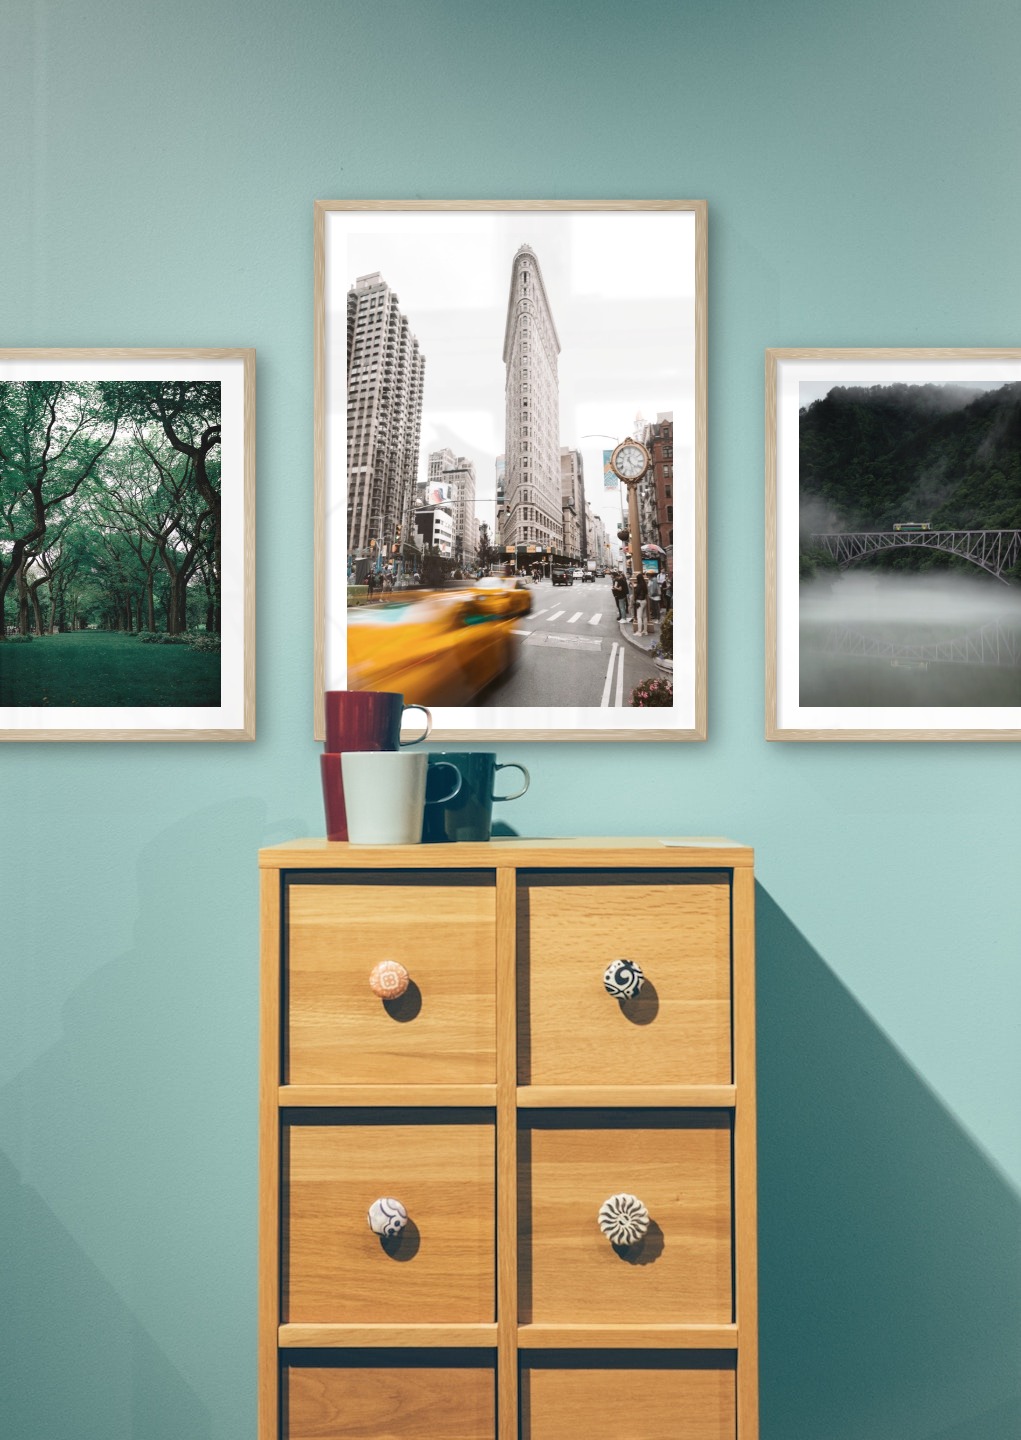 Gallery wall with picture frames in wood in sizes 40x50 and 50x70 with prints "Greenery and trees", "Yellow taxis in town" and "Train over bridge"